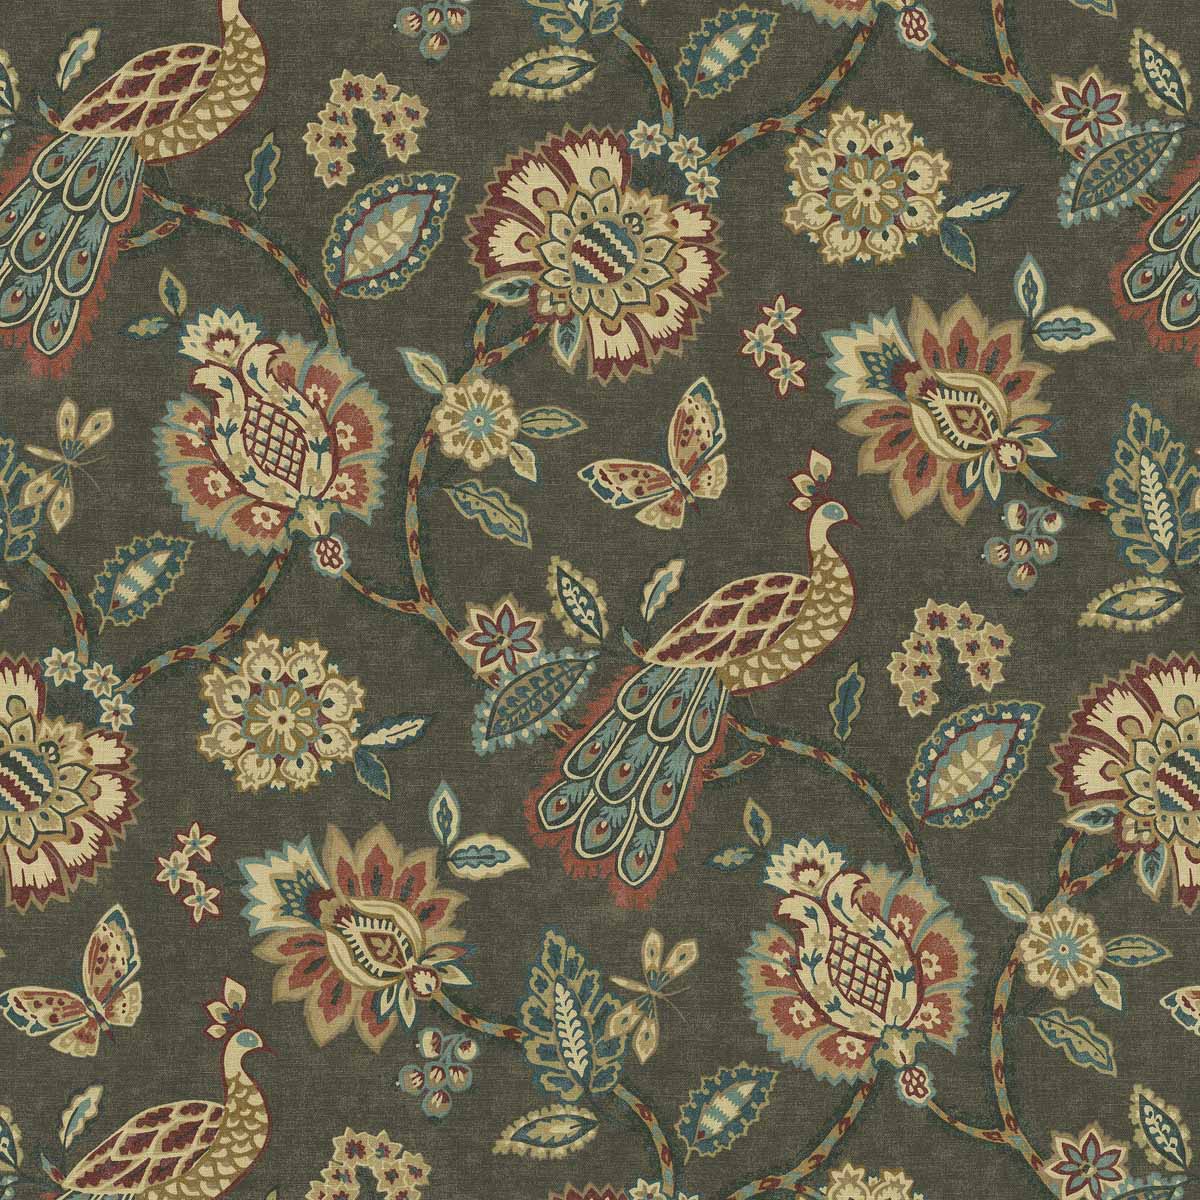 HYBIRD/TAUPE - Prints Fabric Suitable For Drapery